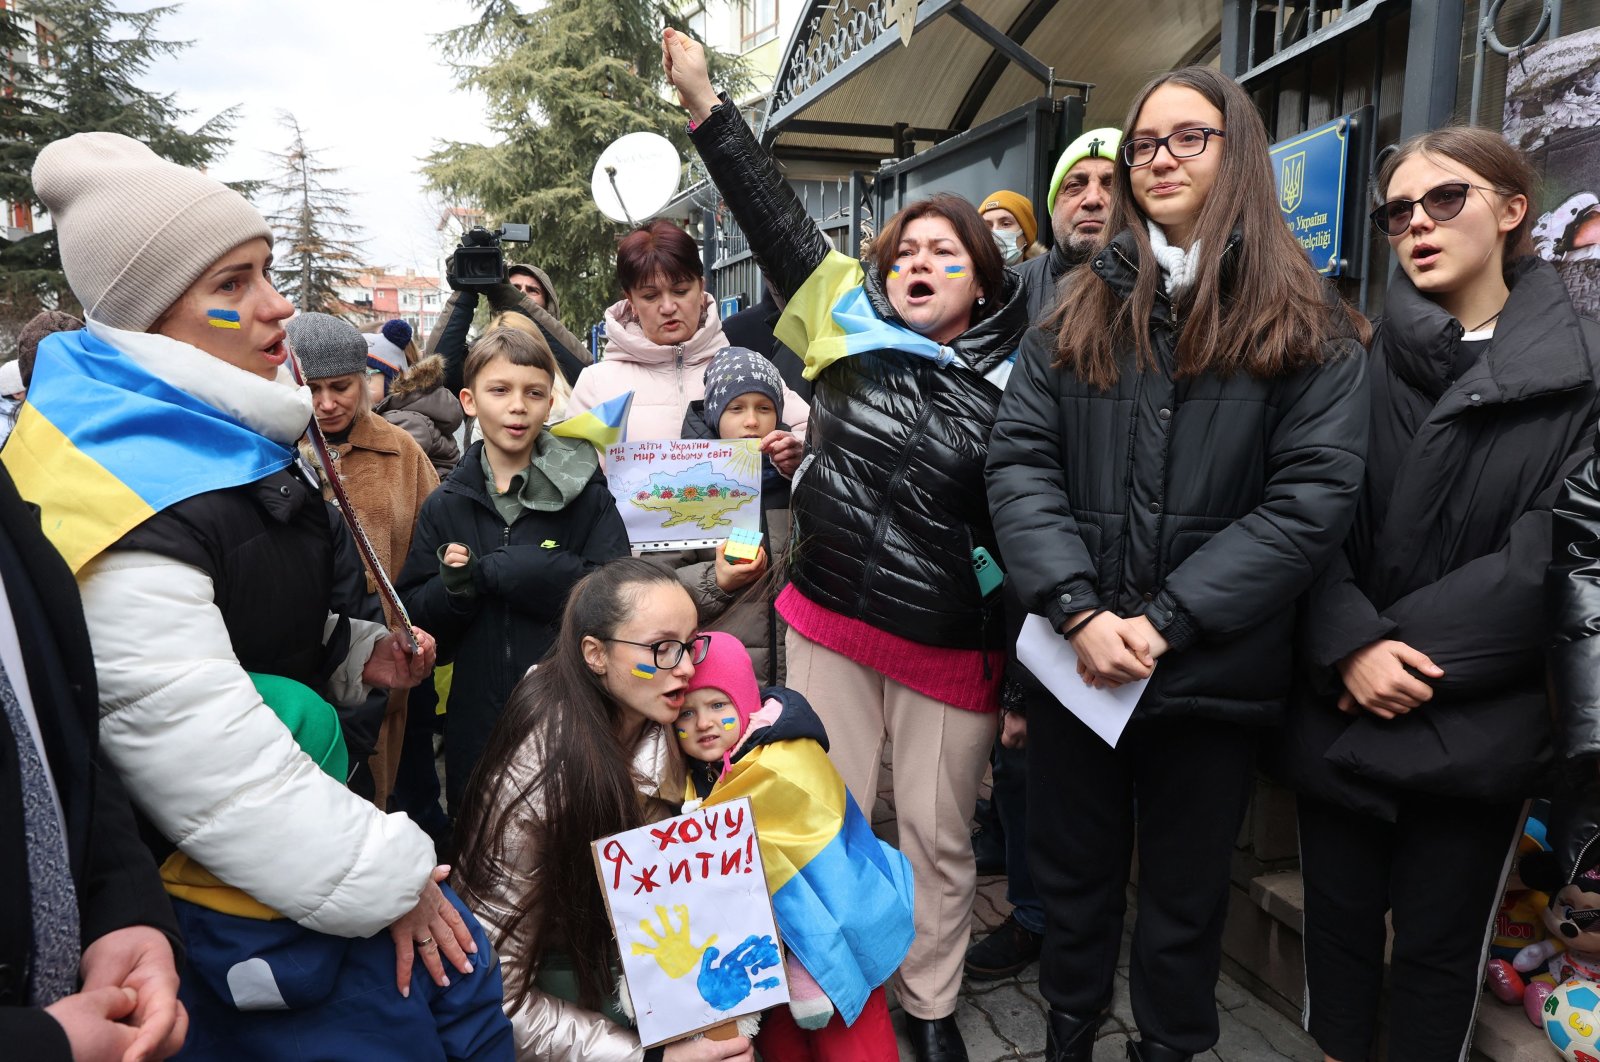 Ukrainians living in Turkey participate in a protest held in front of the Ukrainian Embassy in Ankara on March 19, 2022 to draw attention to the fact that many children were killed in the ongoing Russian occupation of Ukraine which began on February 24, 2022. (Photo by Adem ALTAN / AFP)